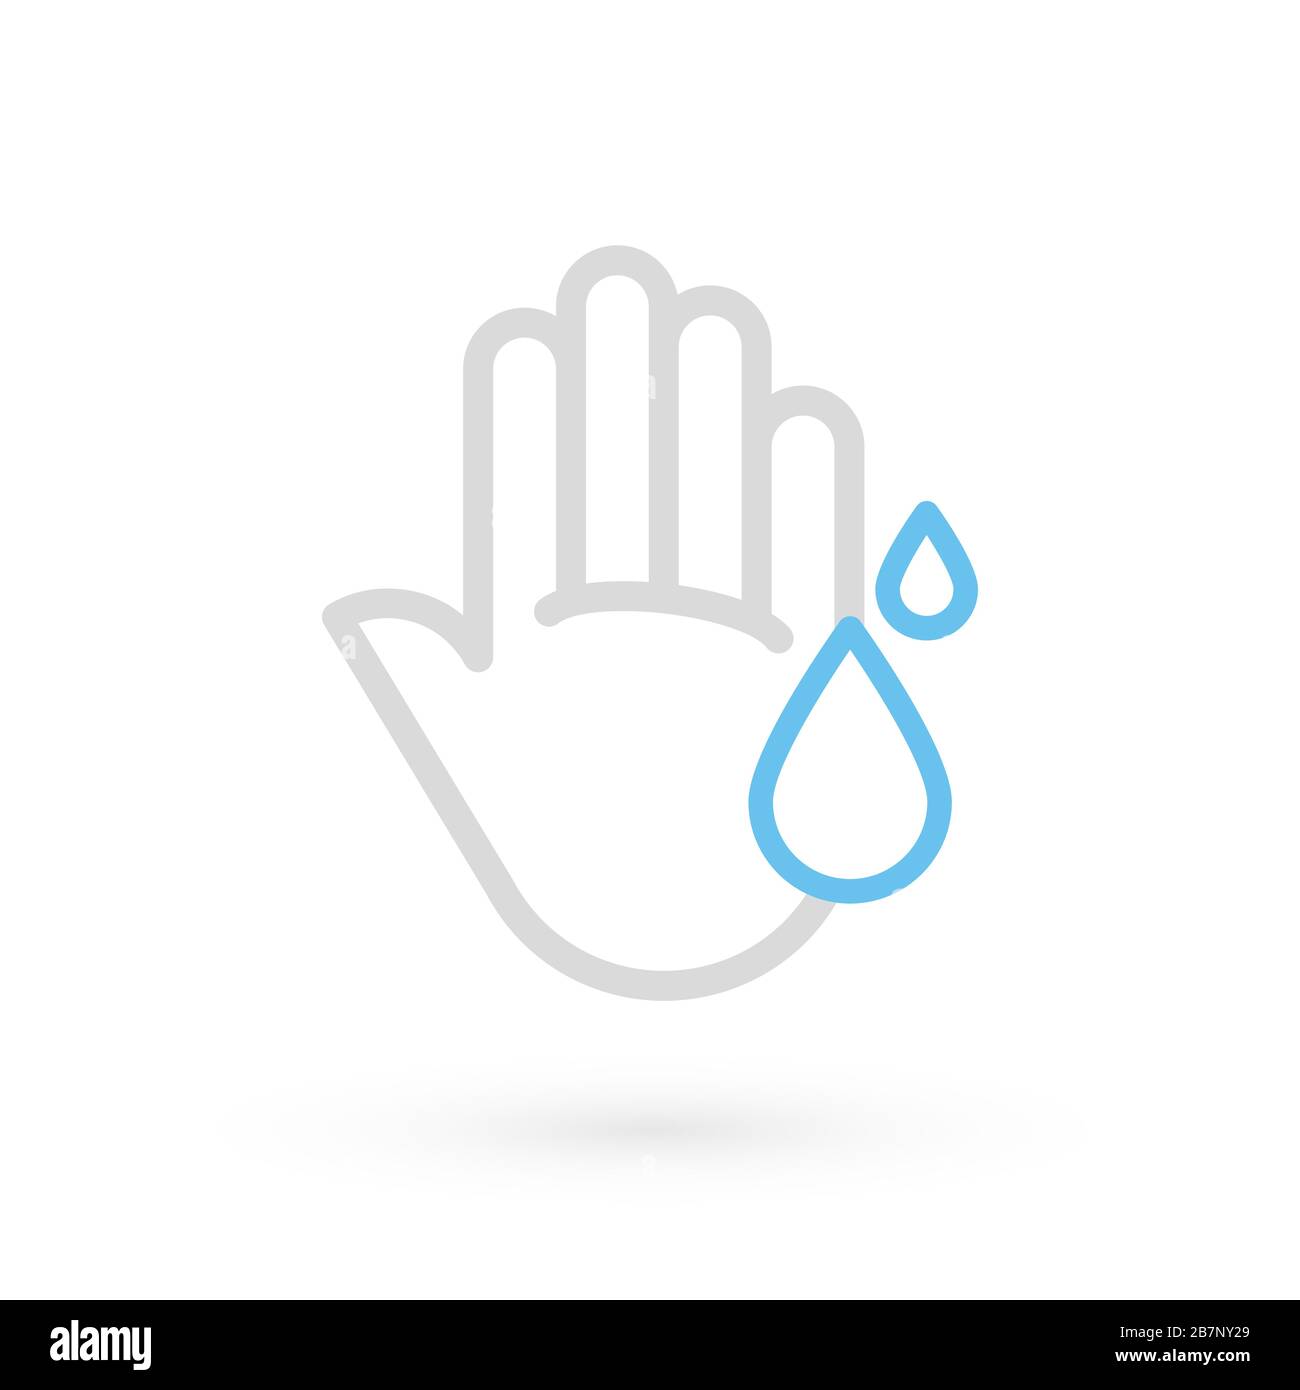 Hand washing icon. Hands with water drops symbol. Prevention against viruses, bacteria, coronavirus. Concept of hygiene, cleanliness, disinfection Stock Vector